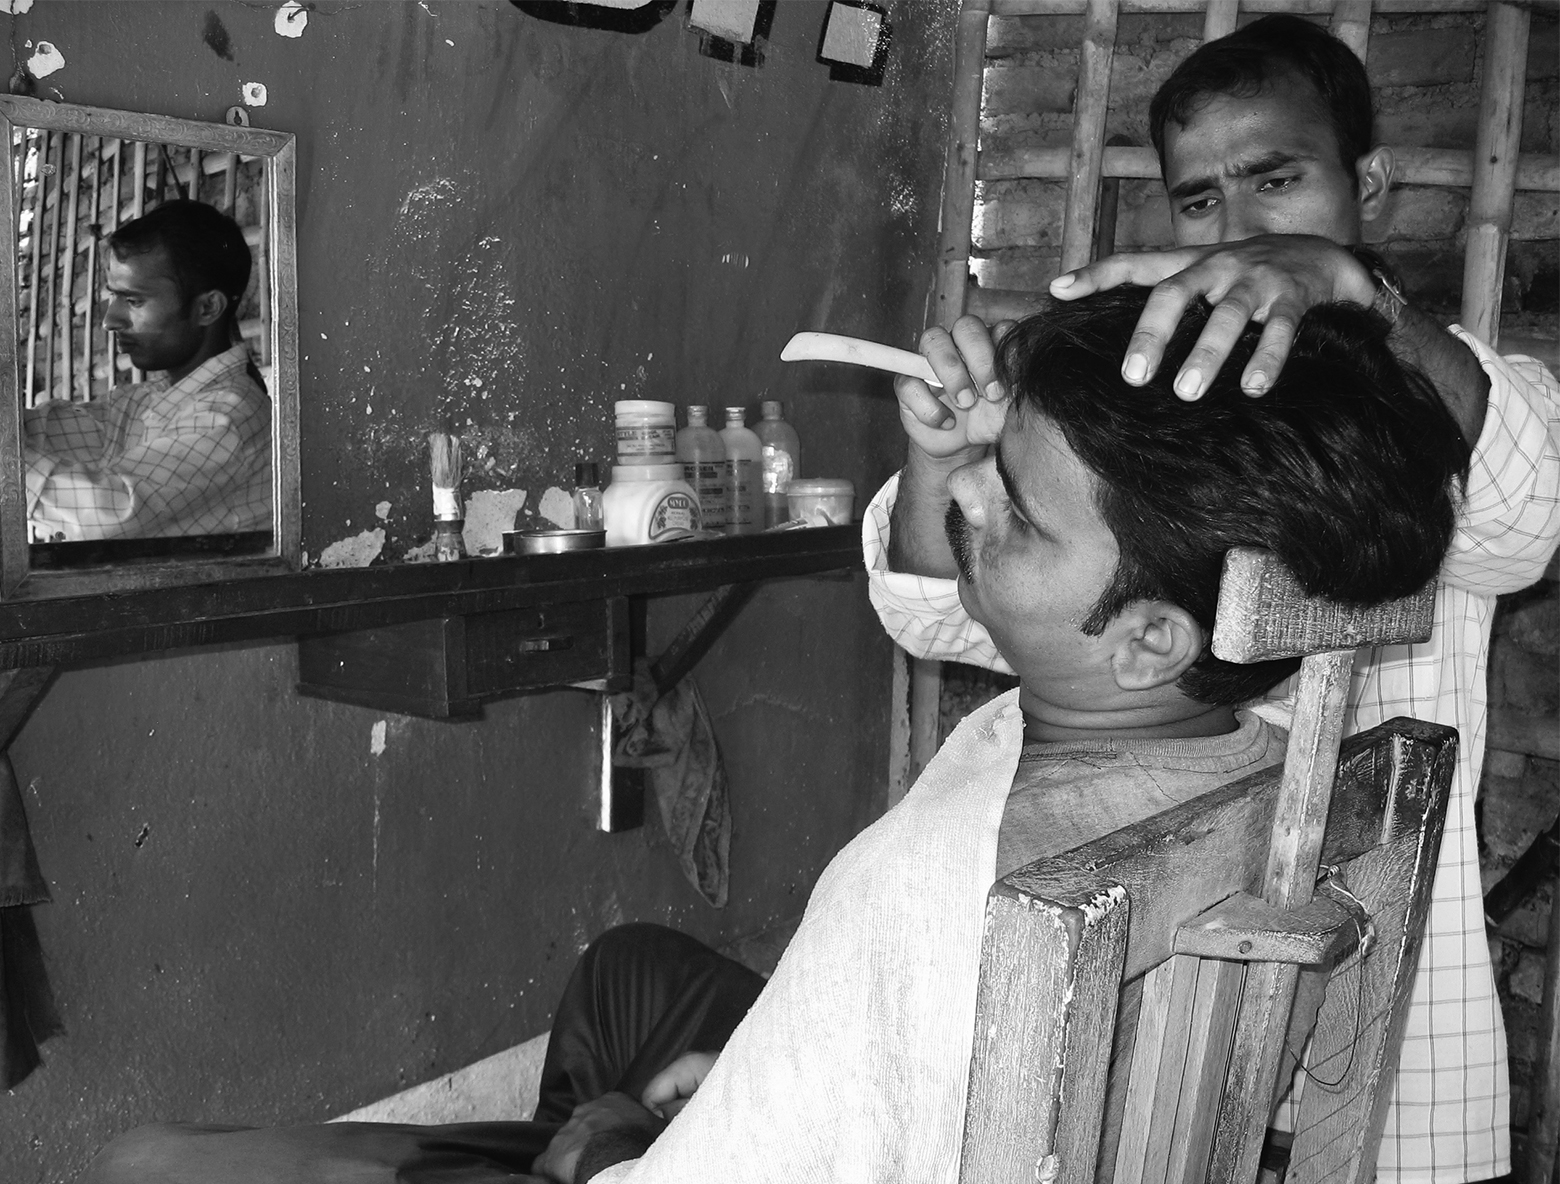 A barber shaves a man’s face with a straight razor while firmly grasping the top of the man’s head to steady it. The spare, wooden barber chair has a height-adjustable T-bar up the back against which the barber positions his client’s head.